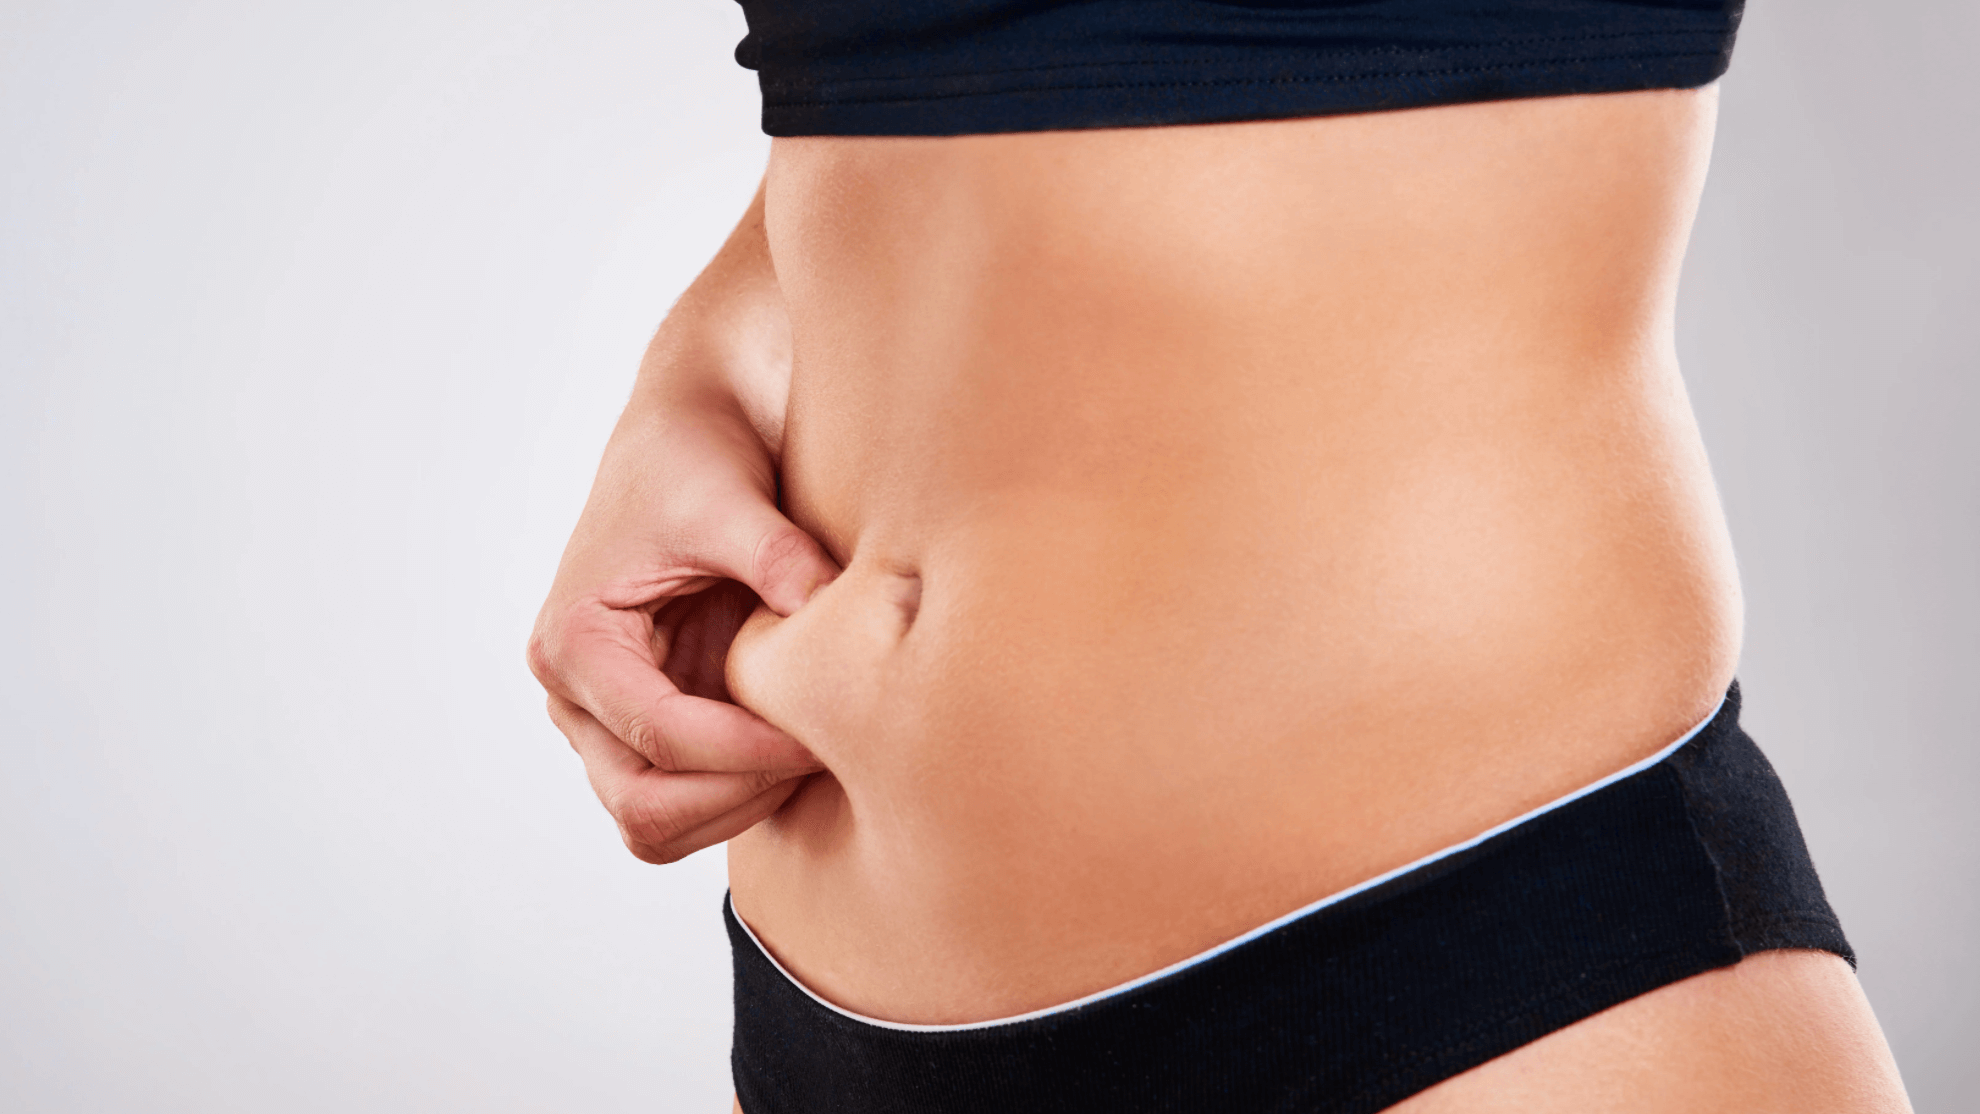 The Real Reason Not Everyone Can Get A Flat Stomach